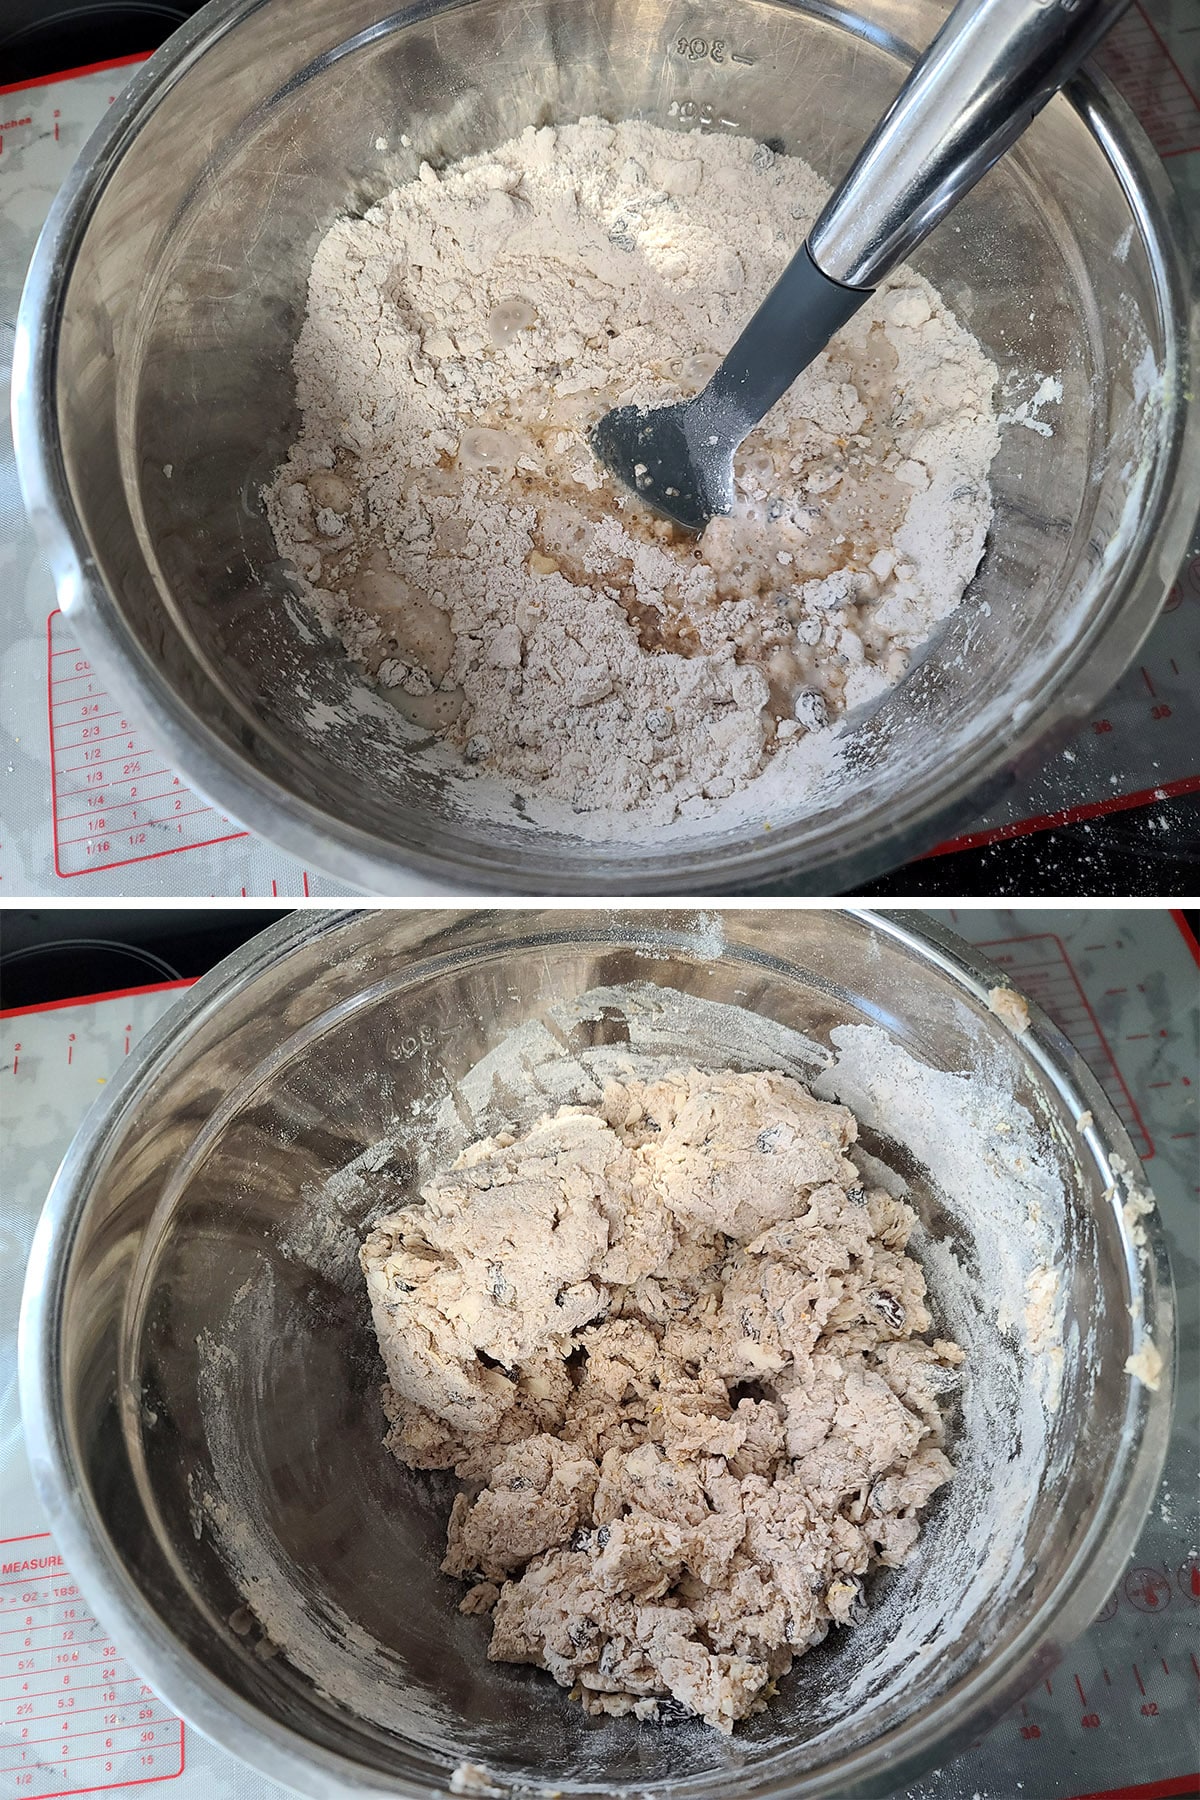 The milk being added to the bowl of dough ingredients and mixed to a shaggy dough.